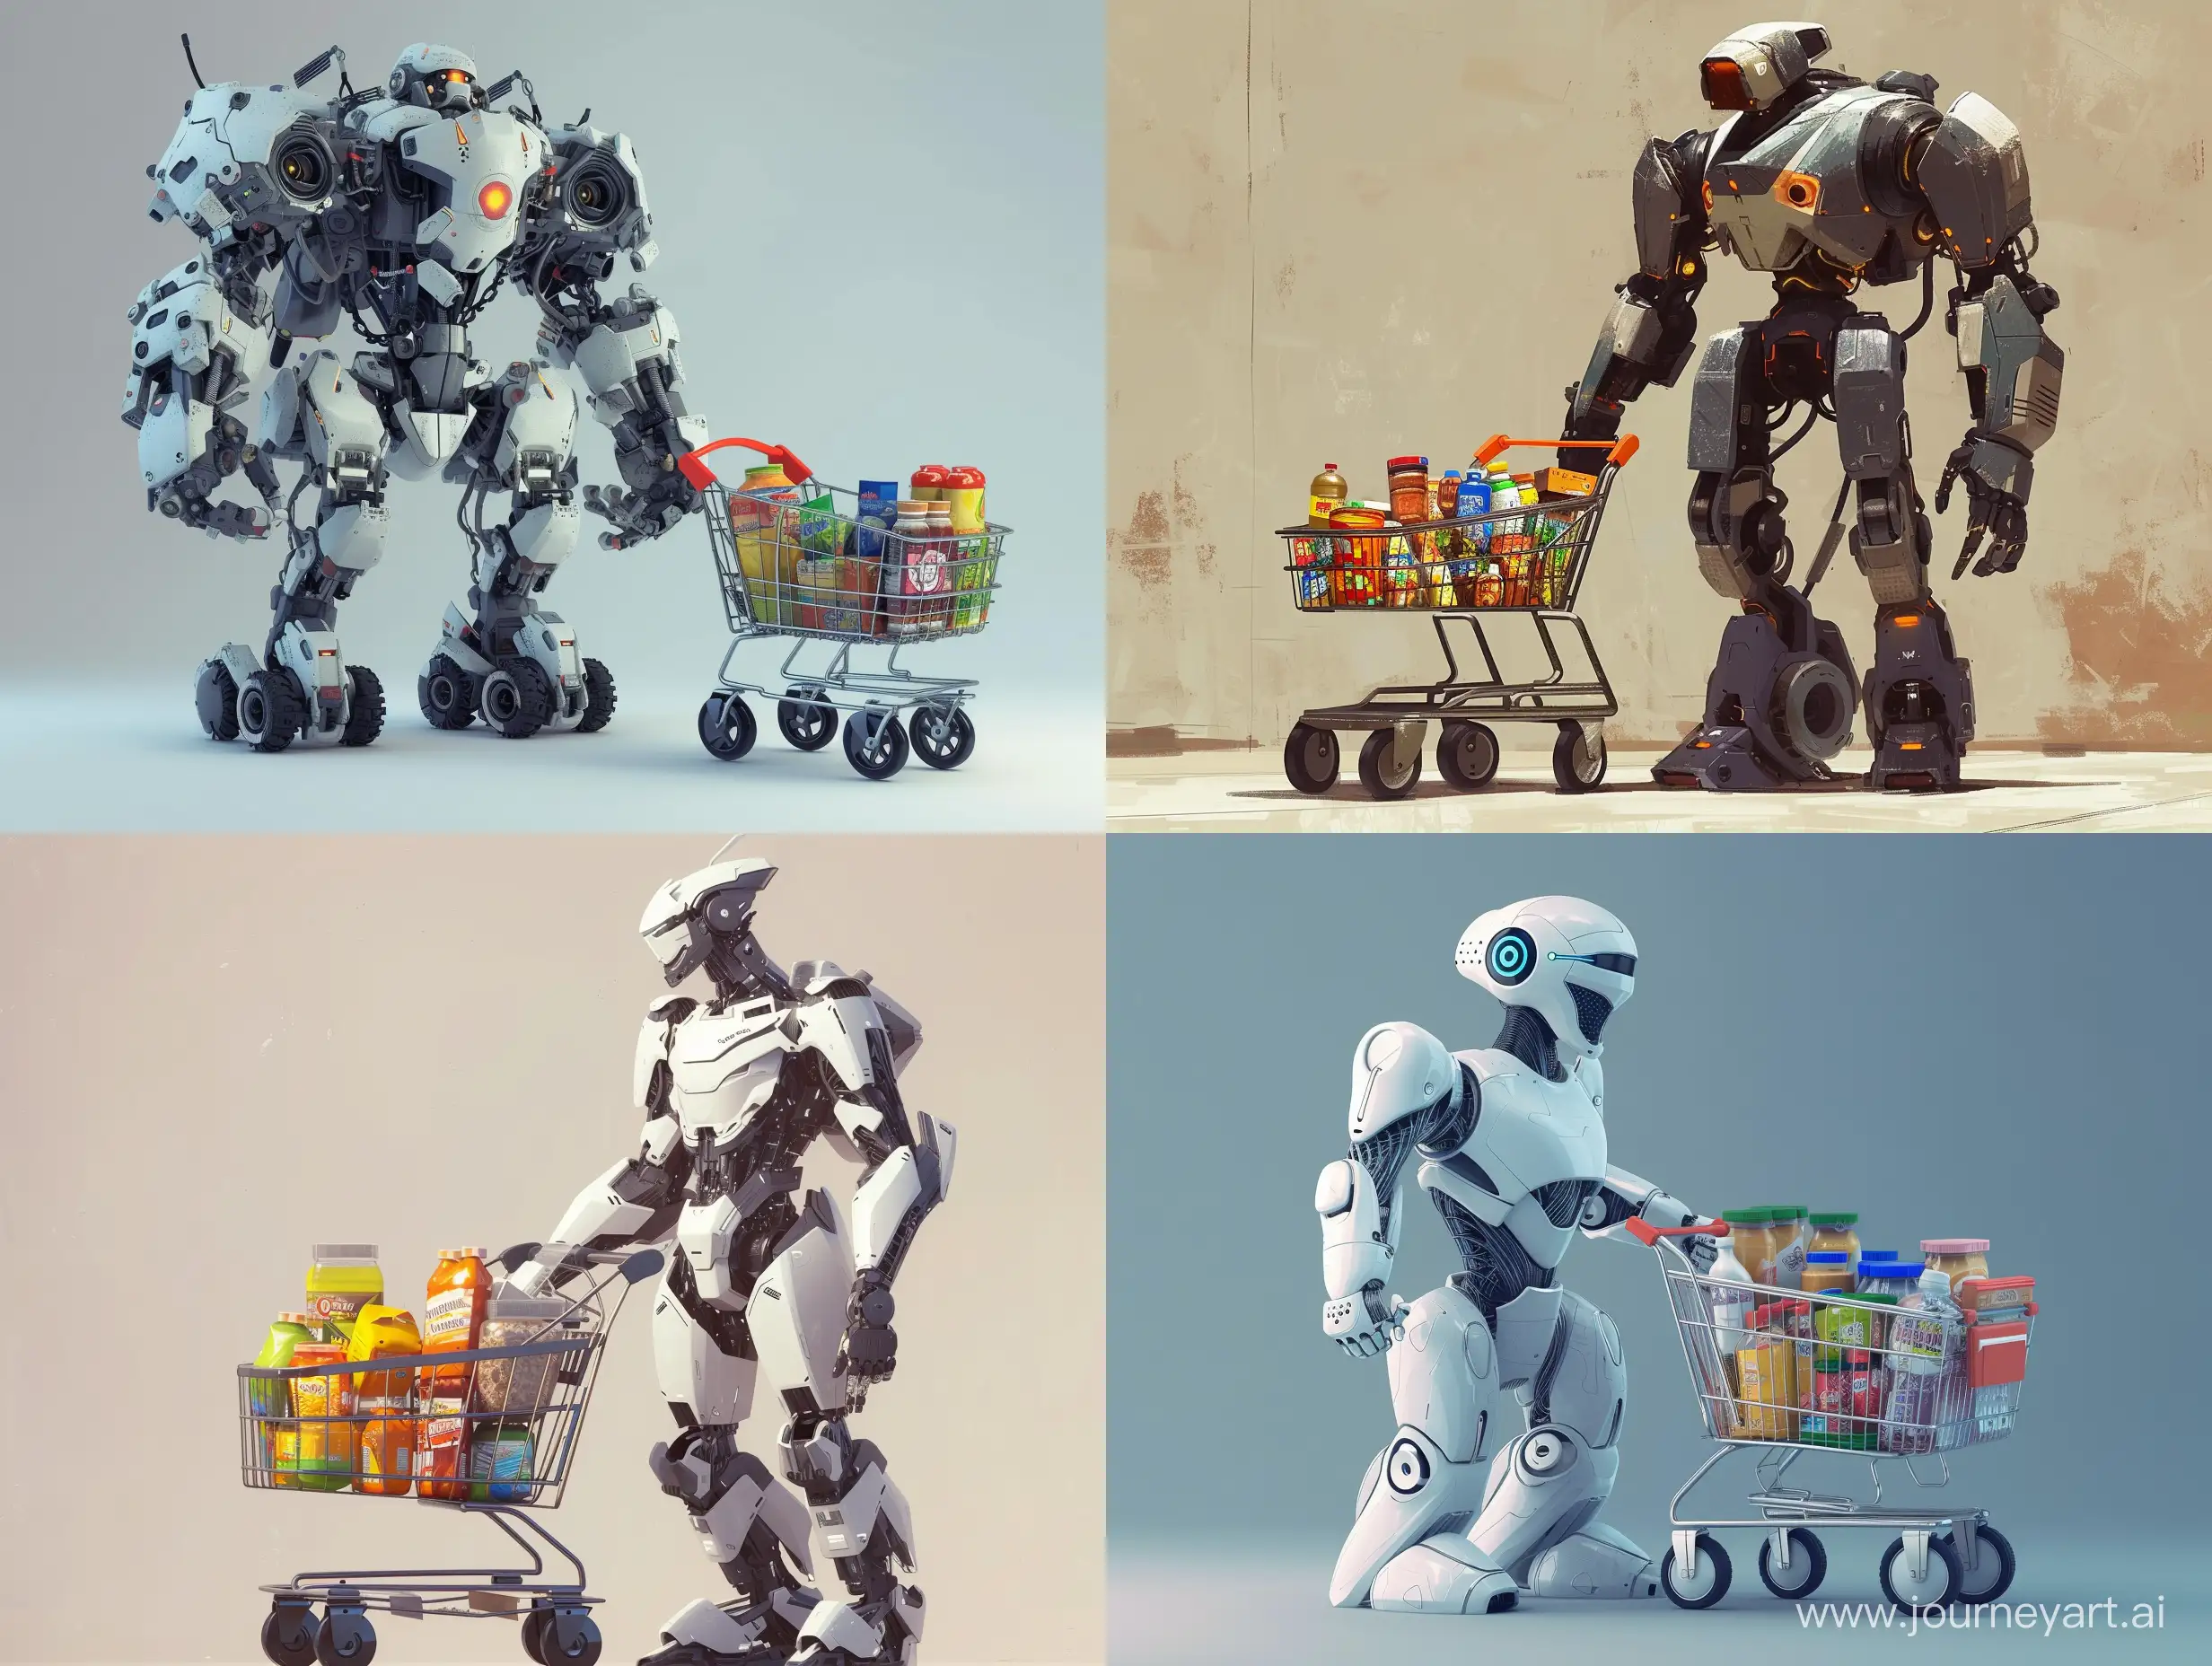 Futuristic-AI-Robot-Shopping-with-HighTech-Grocery-Cart